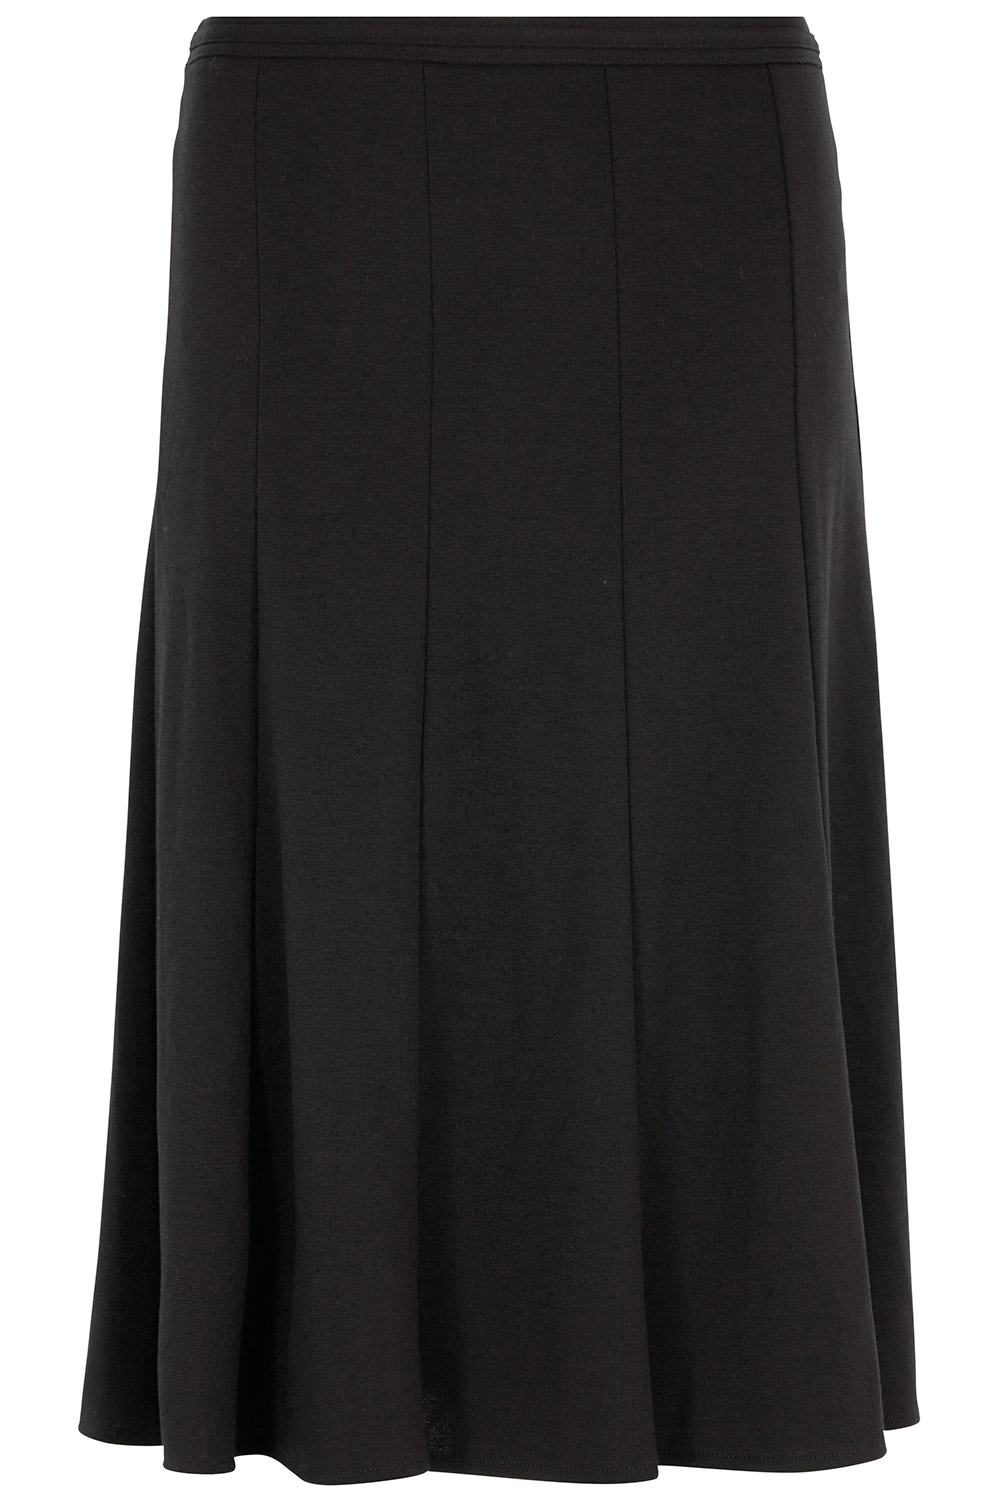 Elasticated Waist Ponte Panel Skirt Home Delivery Bonmarche